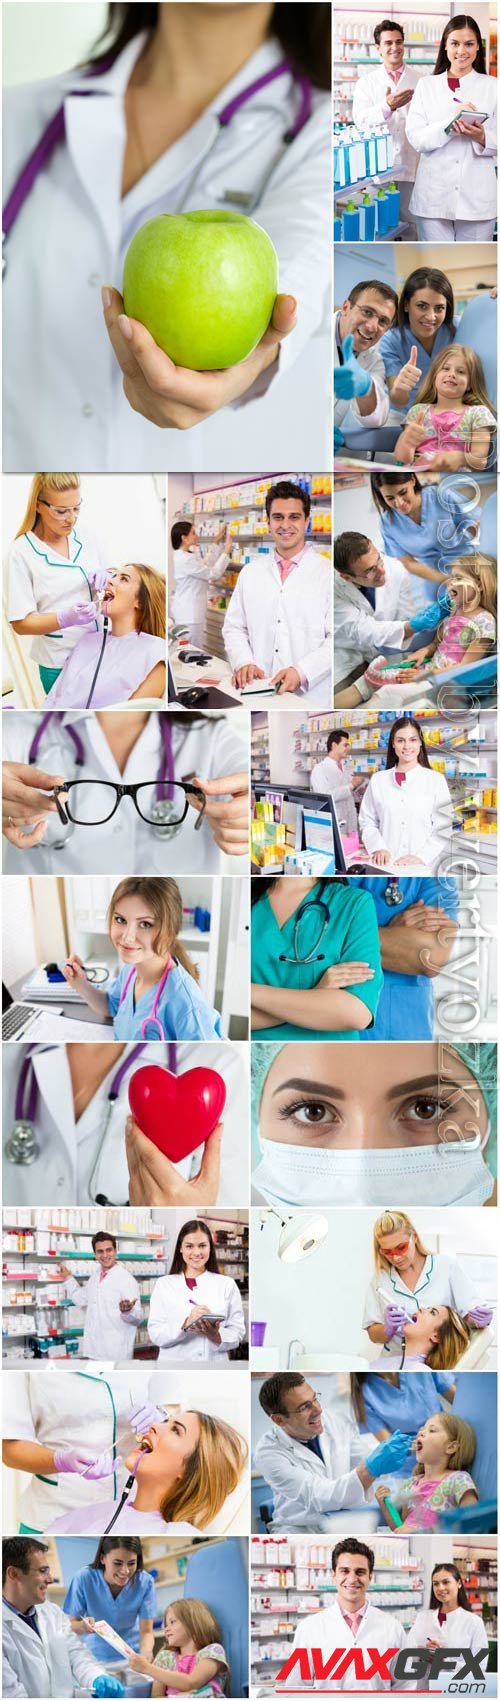 Set of photos with doctors stock photo